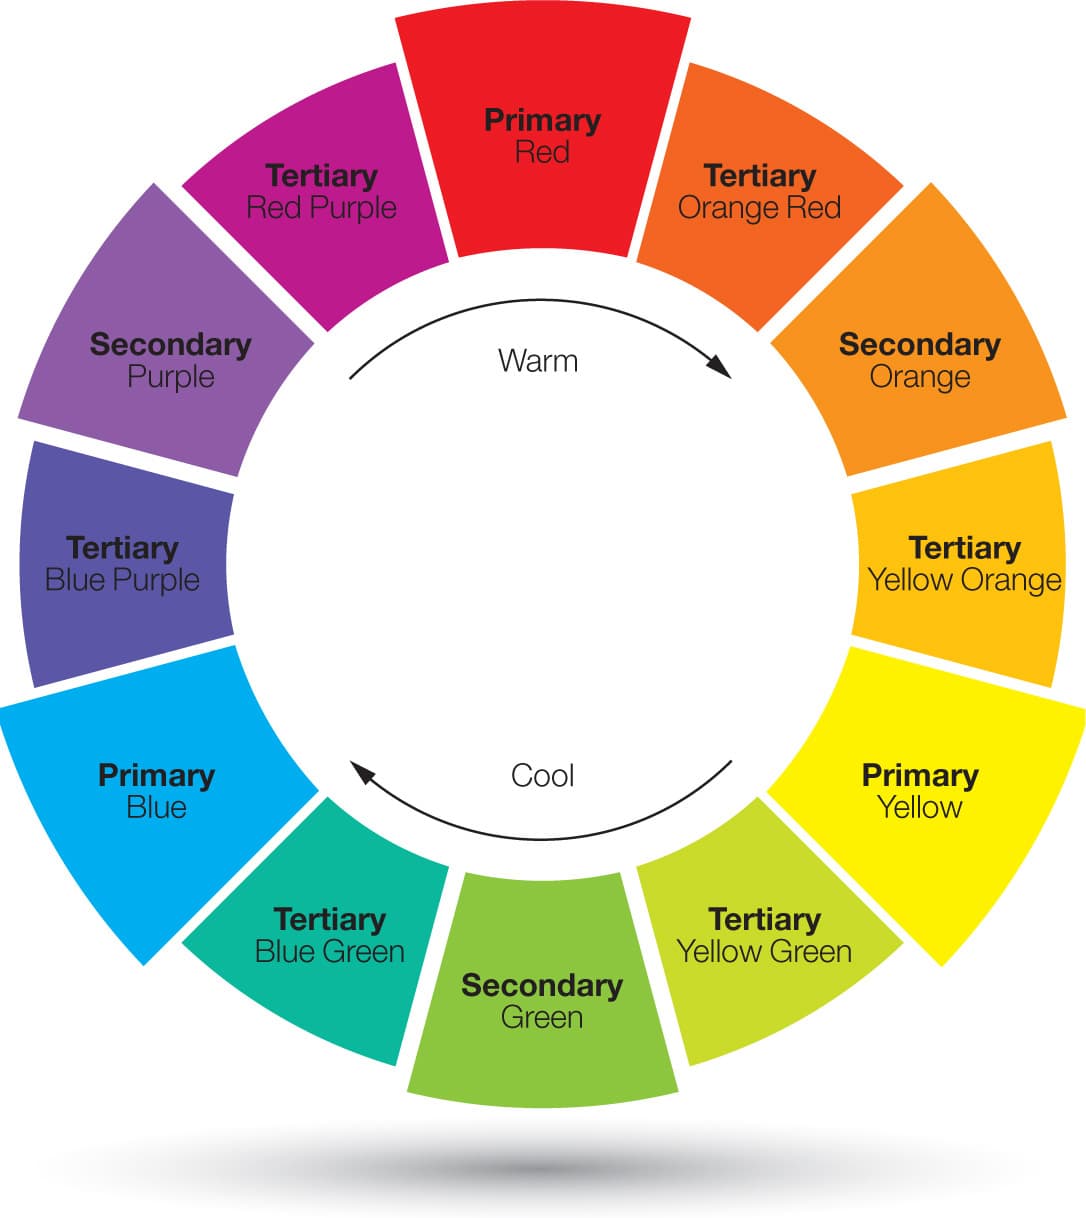 The Color Wheel: What’s the Temp? - The Complete Color Harmony, Pantone ...